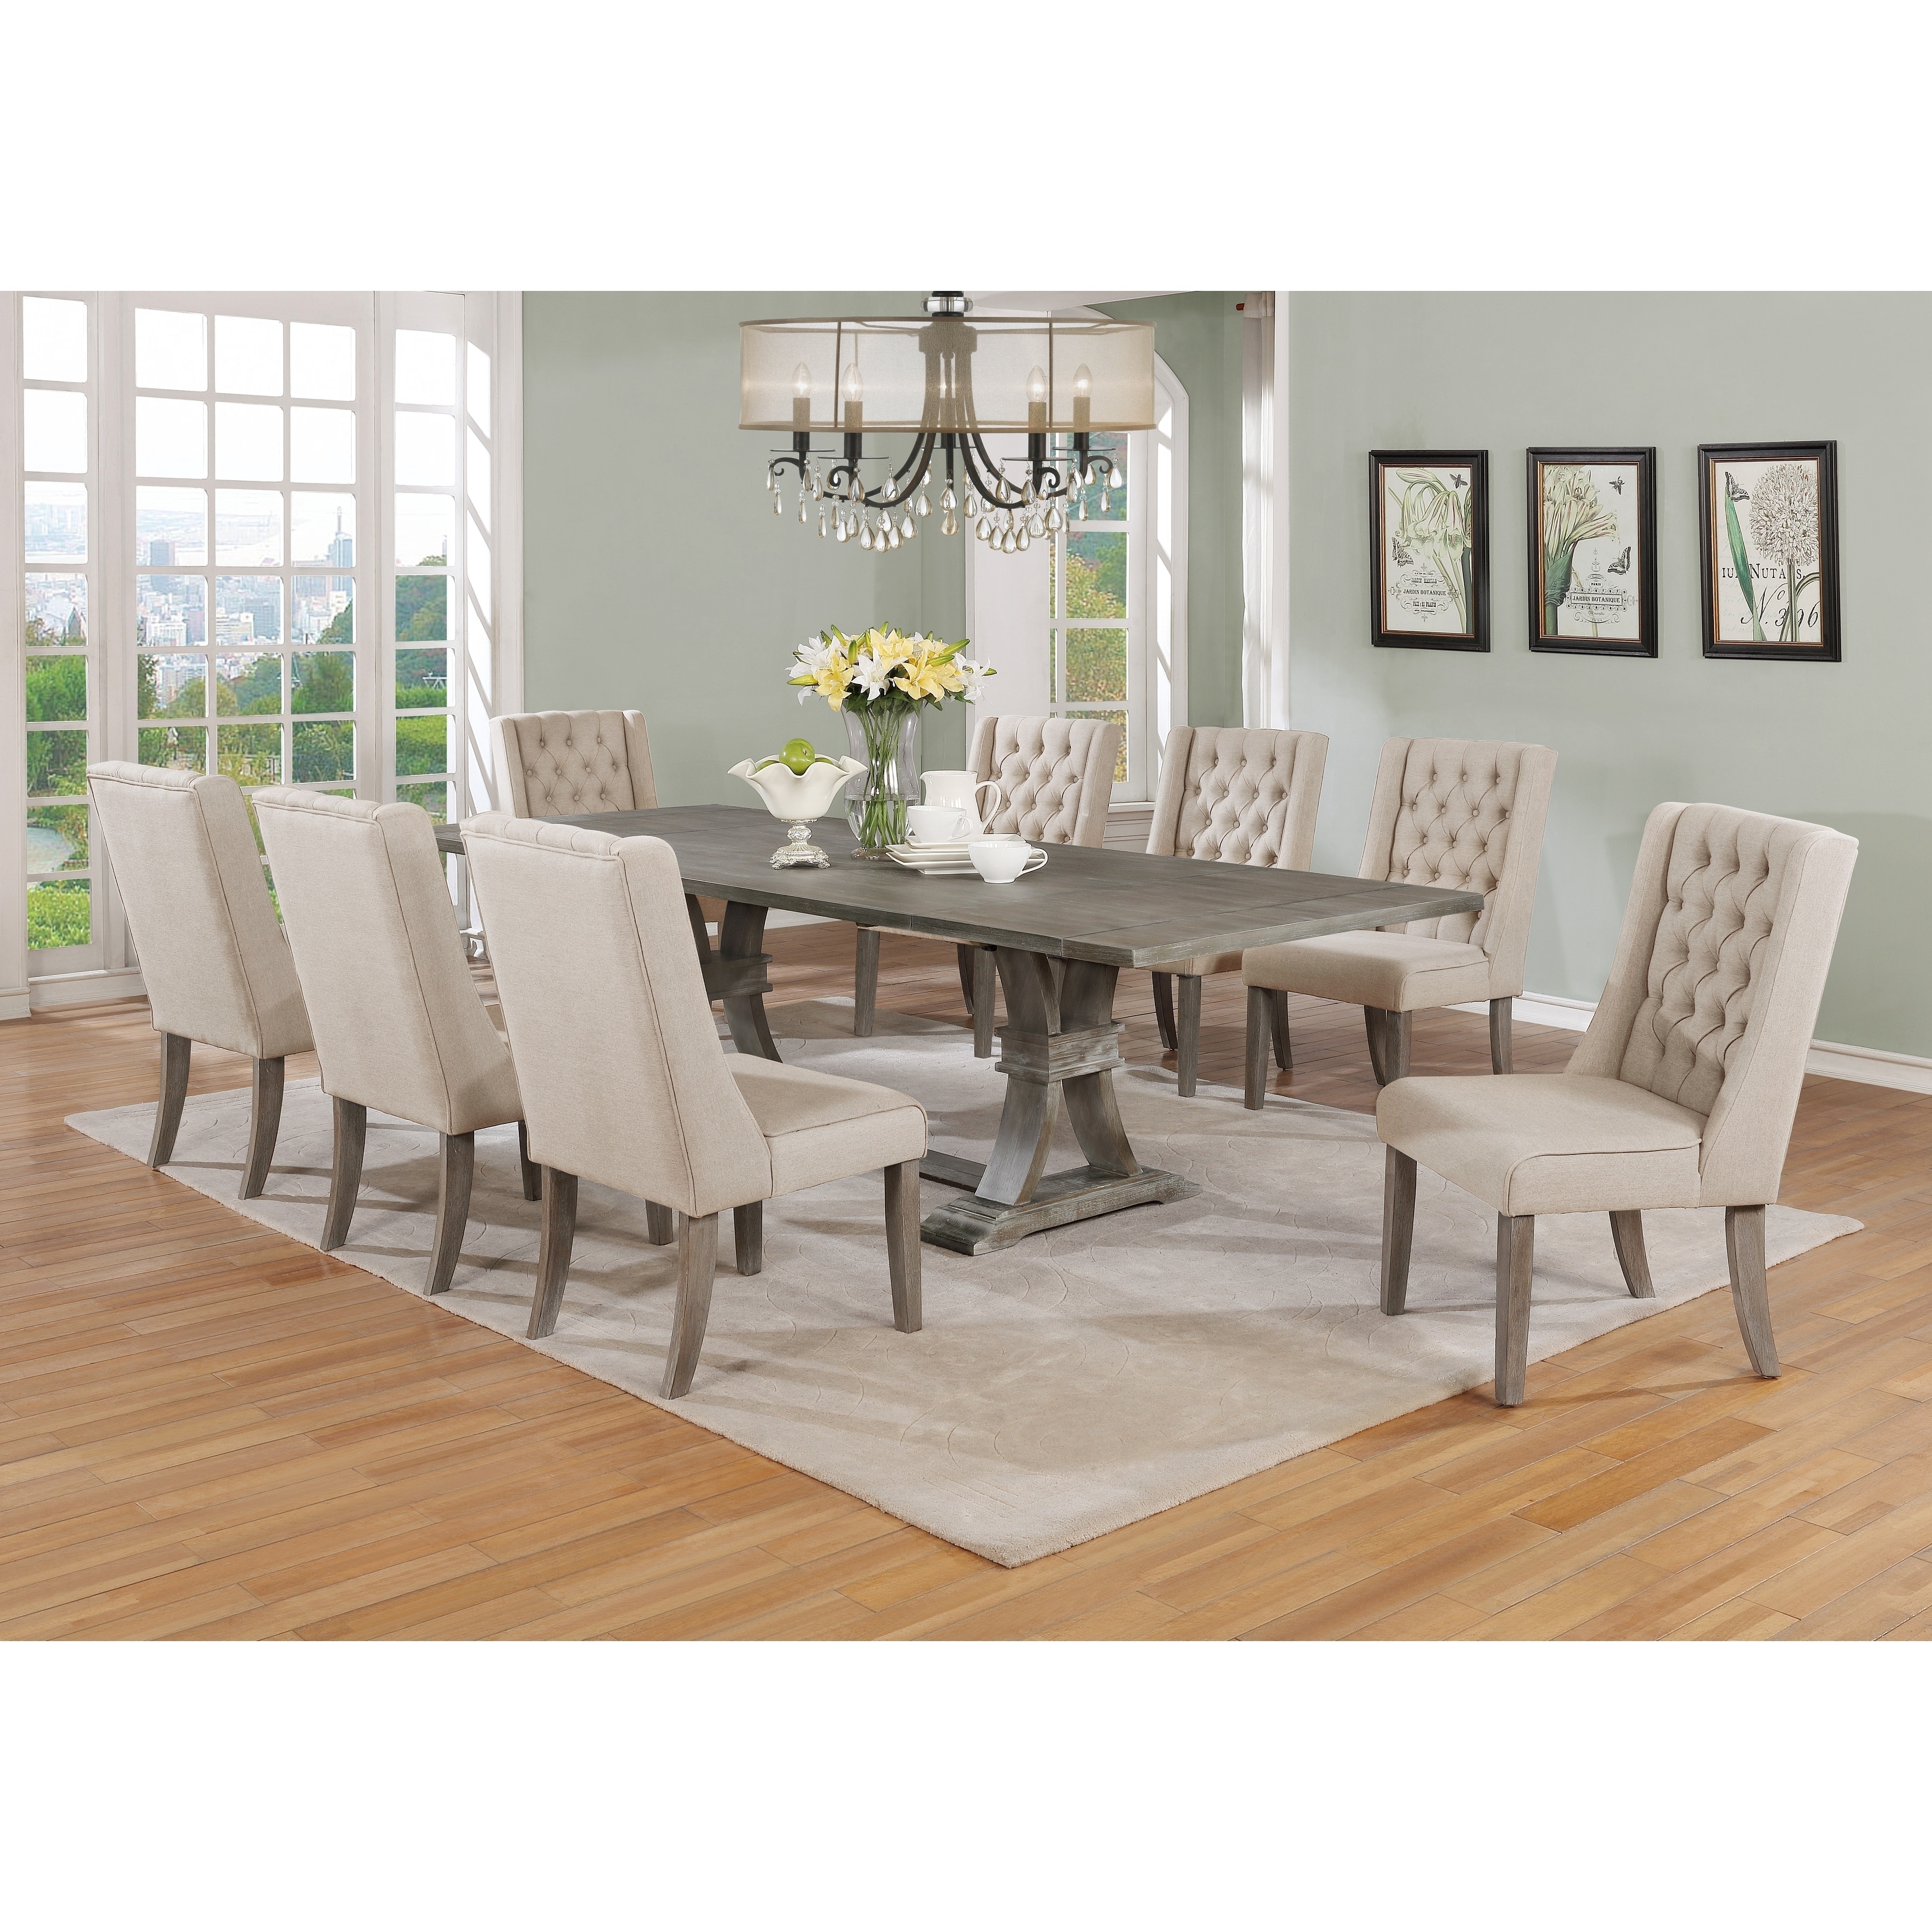 Best Quality Furniture 9 Piece Rustic Extending Grey Dining Set On Sale Overstock 24148442